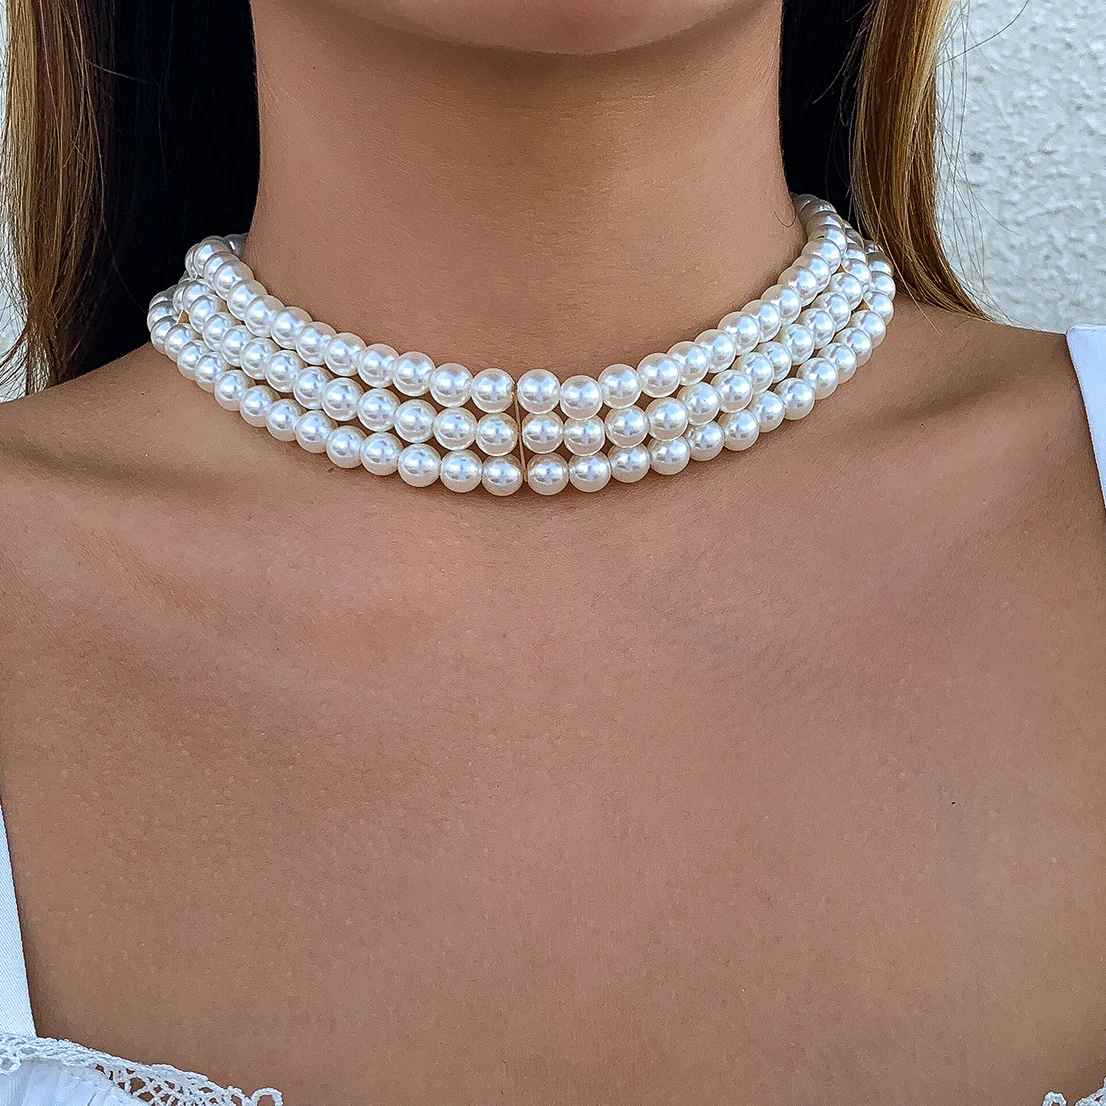 

Ingemark Elegant Imitation Pearl Chain Necklace for Women Wedding Multilayer Chunky Bead Neck Jewelry Gift Accessories Bijoux